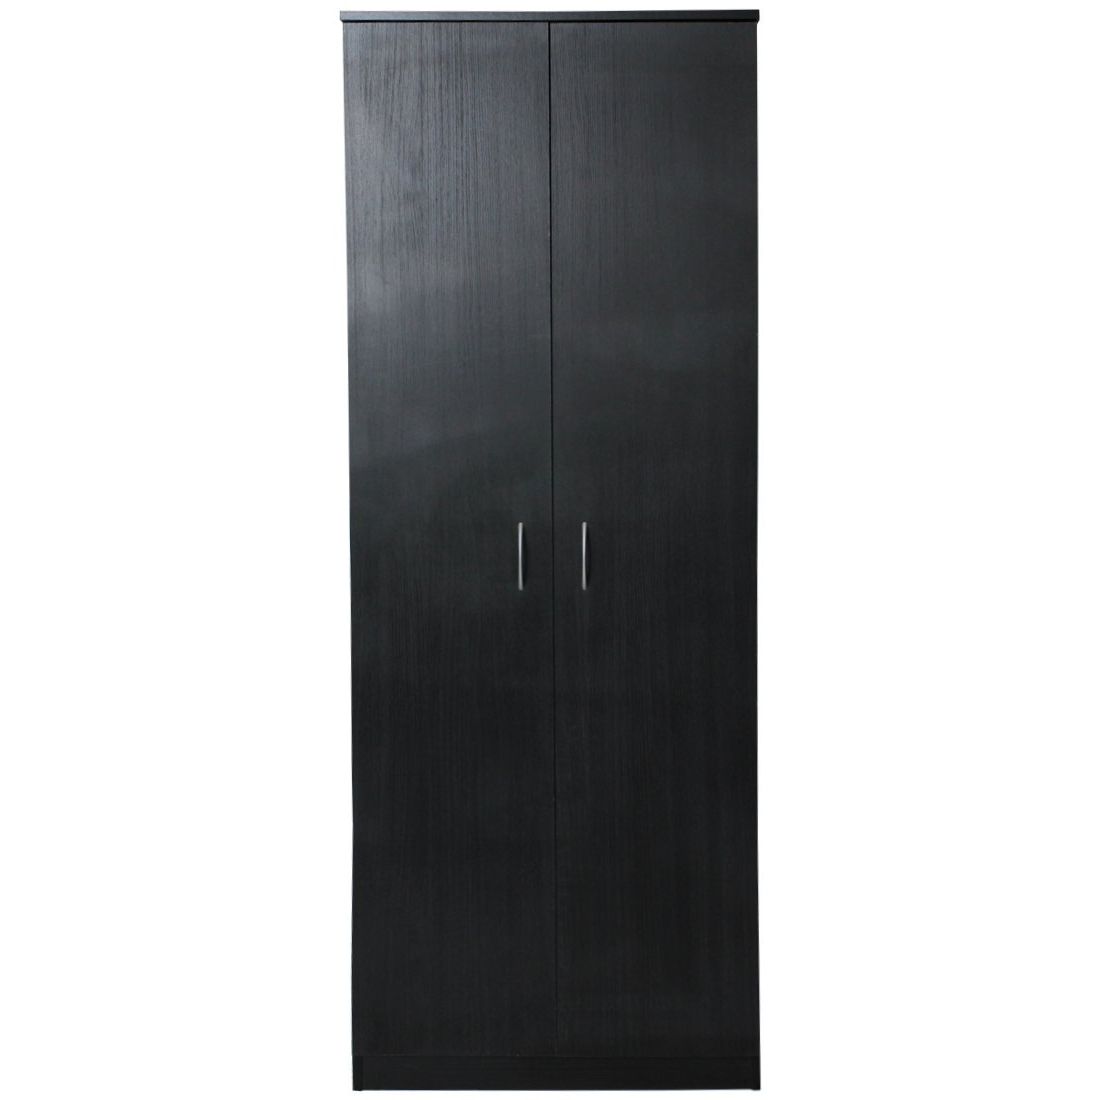 Well Liked Black Wood Wardrobes With Devoted2home Budget Bedroom Furniture With 2 Door Wardrobe, Wood (View 9 of 15)